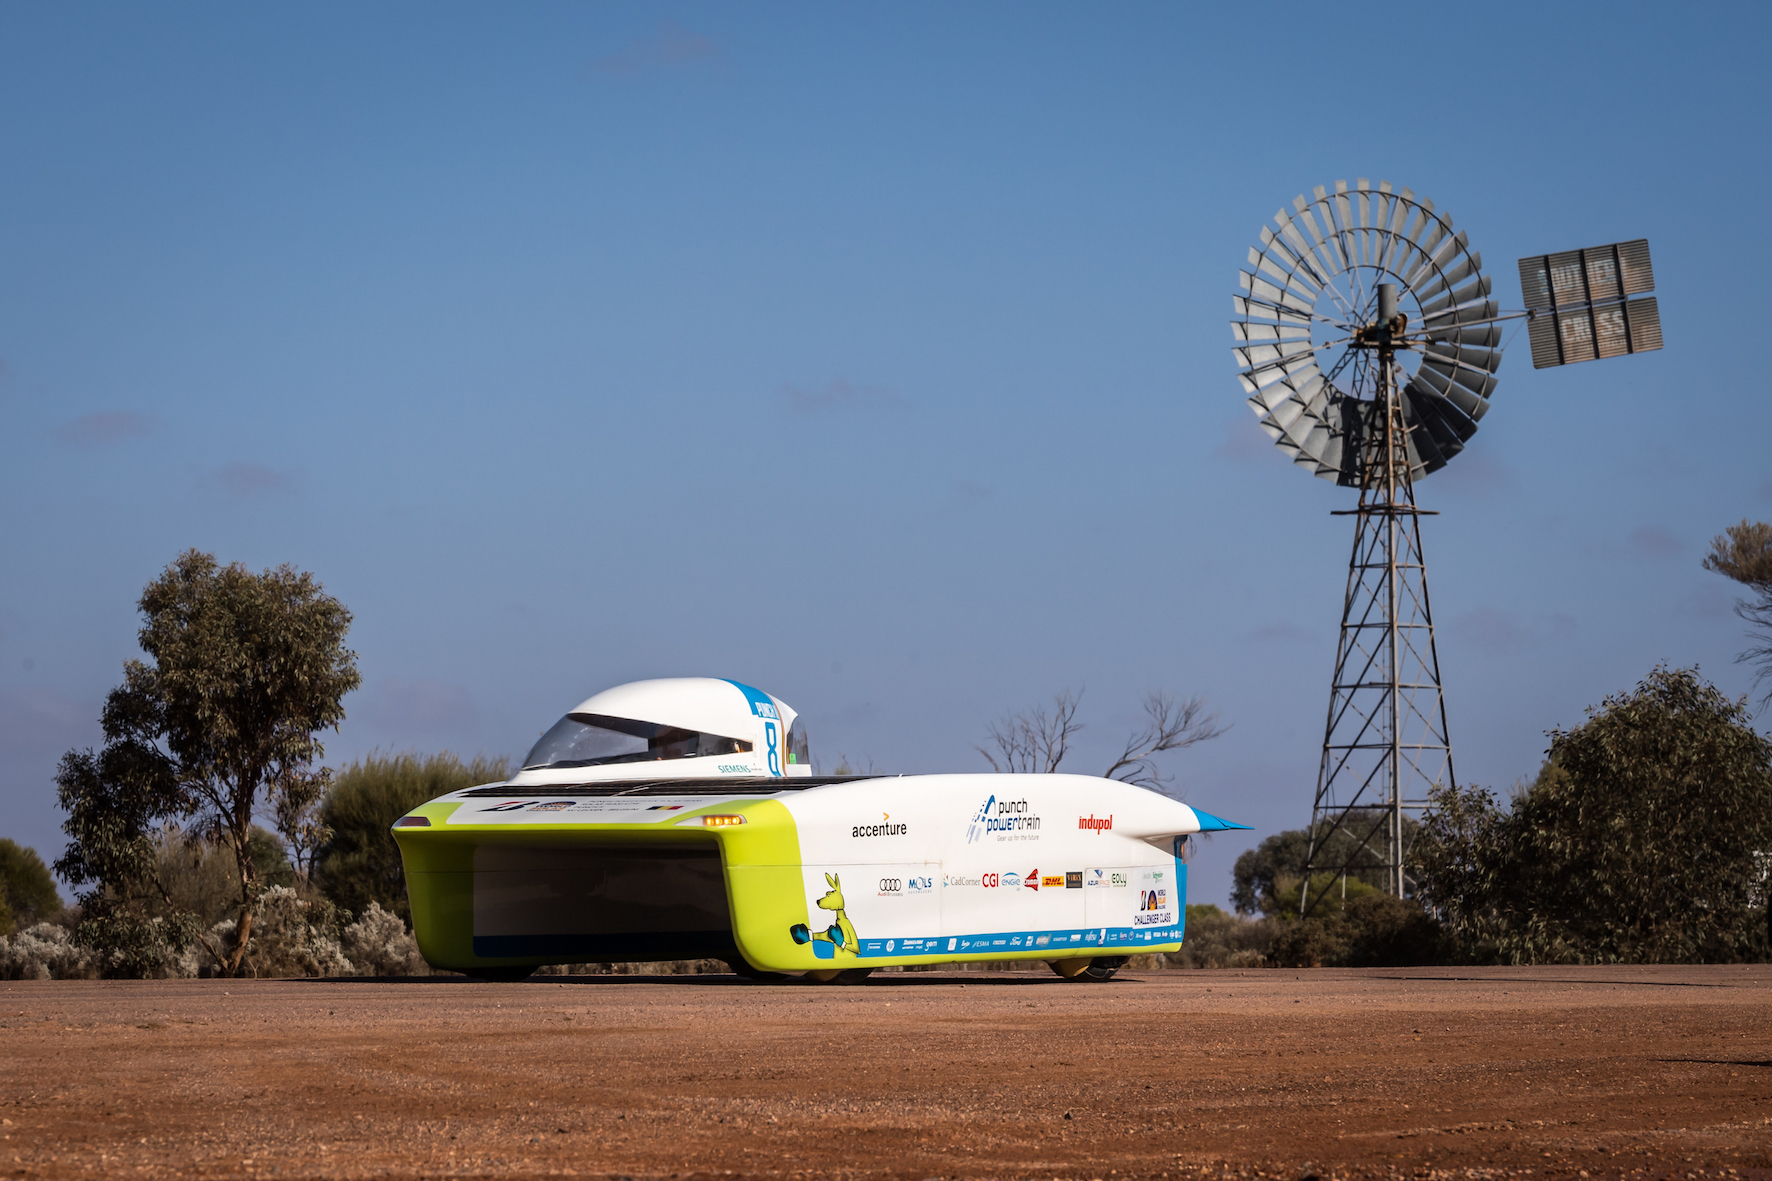 The Punch Powertrain Solar Team car from Belgium competes during the 5th race day of the 2017 World Solar Challenge in Glendambo, Australia on Thursday Oct. 12, 2017. Dutch Nuon Solar team won the challenge, the University of Michigan placed second and the Belgian team finished third. Photo - Punch Powertrain Solar Team / Geert Vanden Wijngaert